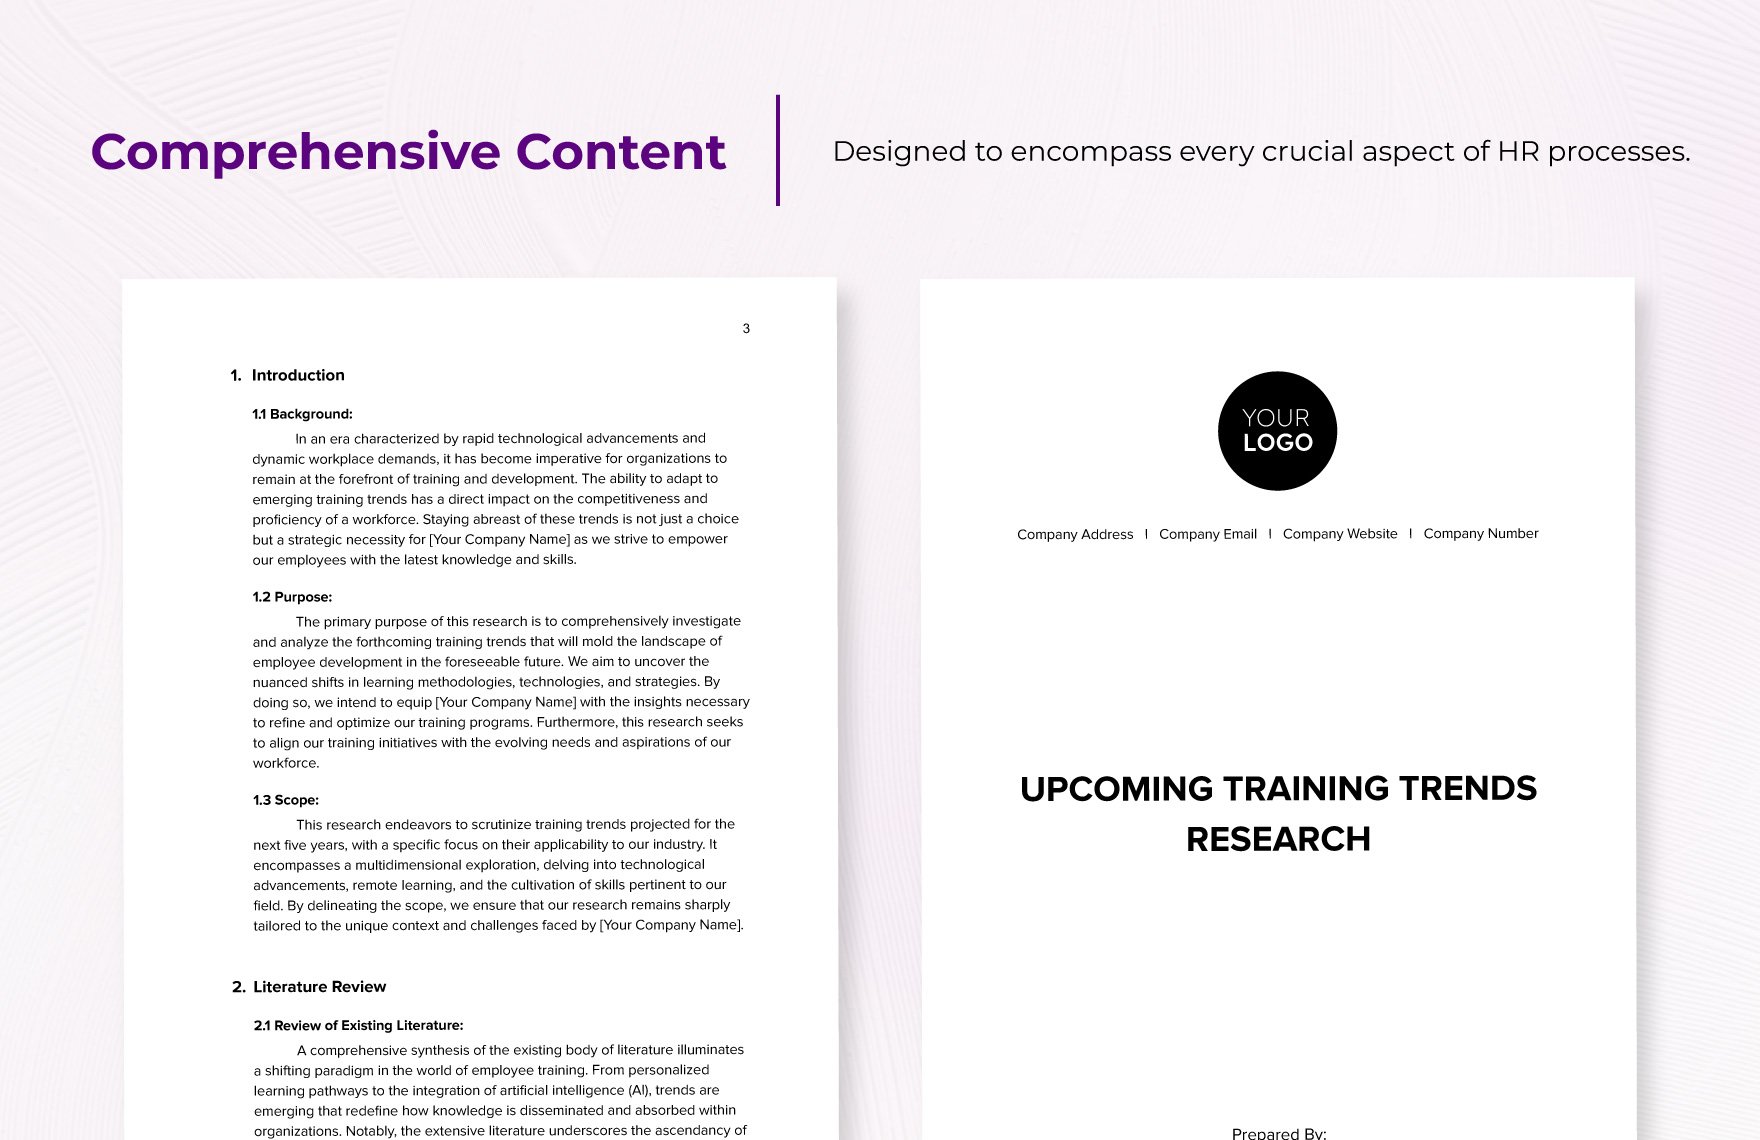 Upcoming Training Trends Research HR Template